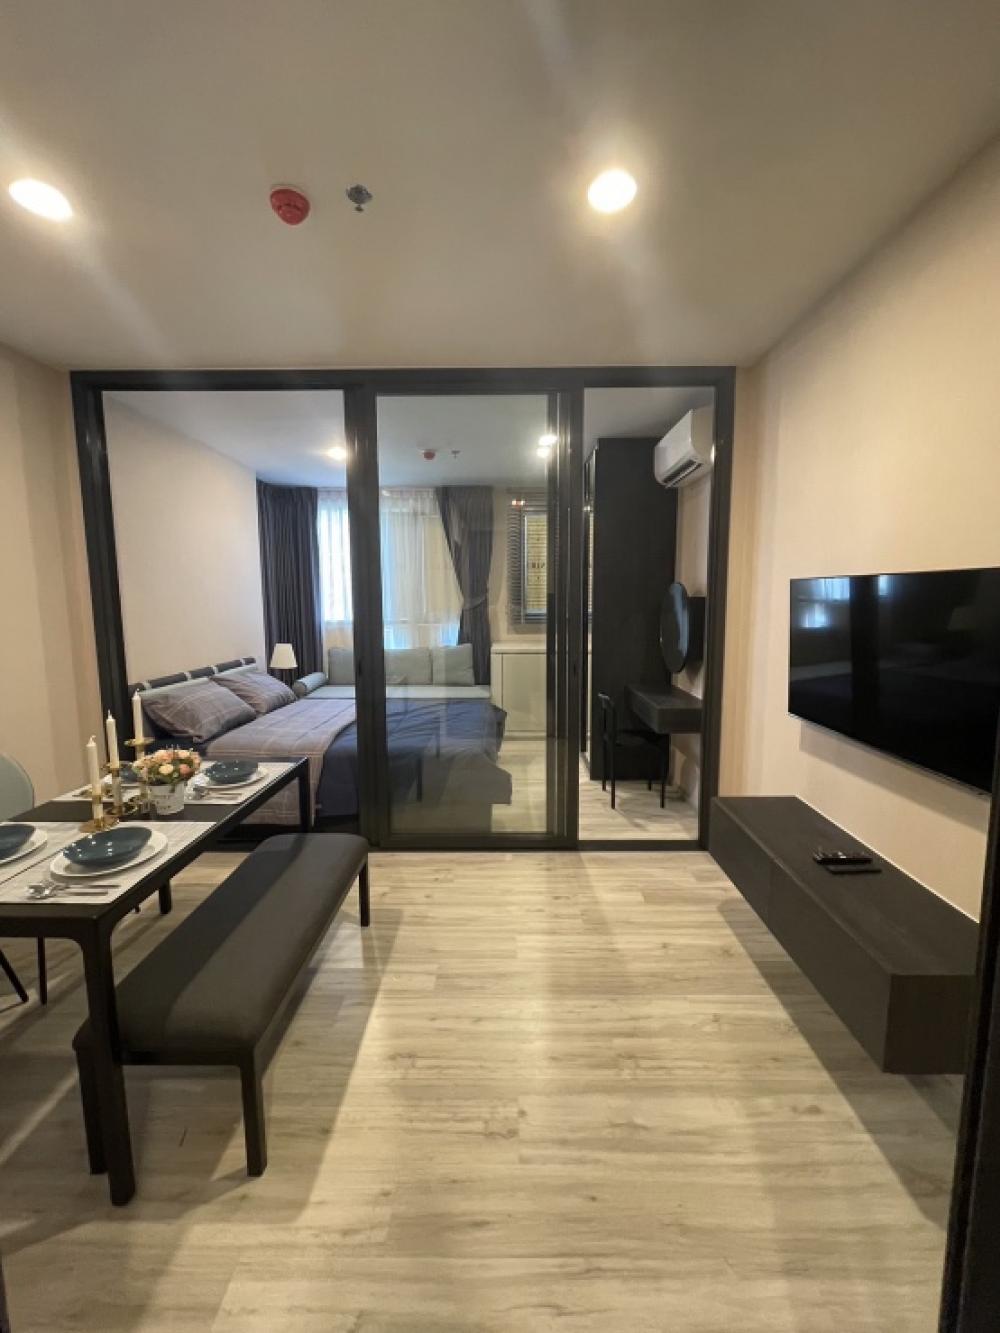 For RentCondoRatchadapisek, Huaikwang, Suttisan : Brand new in the box for rent, Condo XT Huai Khwang, 1 bedroom, fully furnished, fully furnished